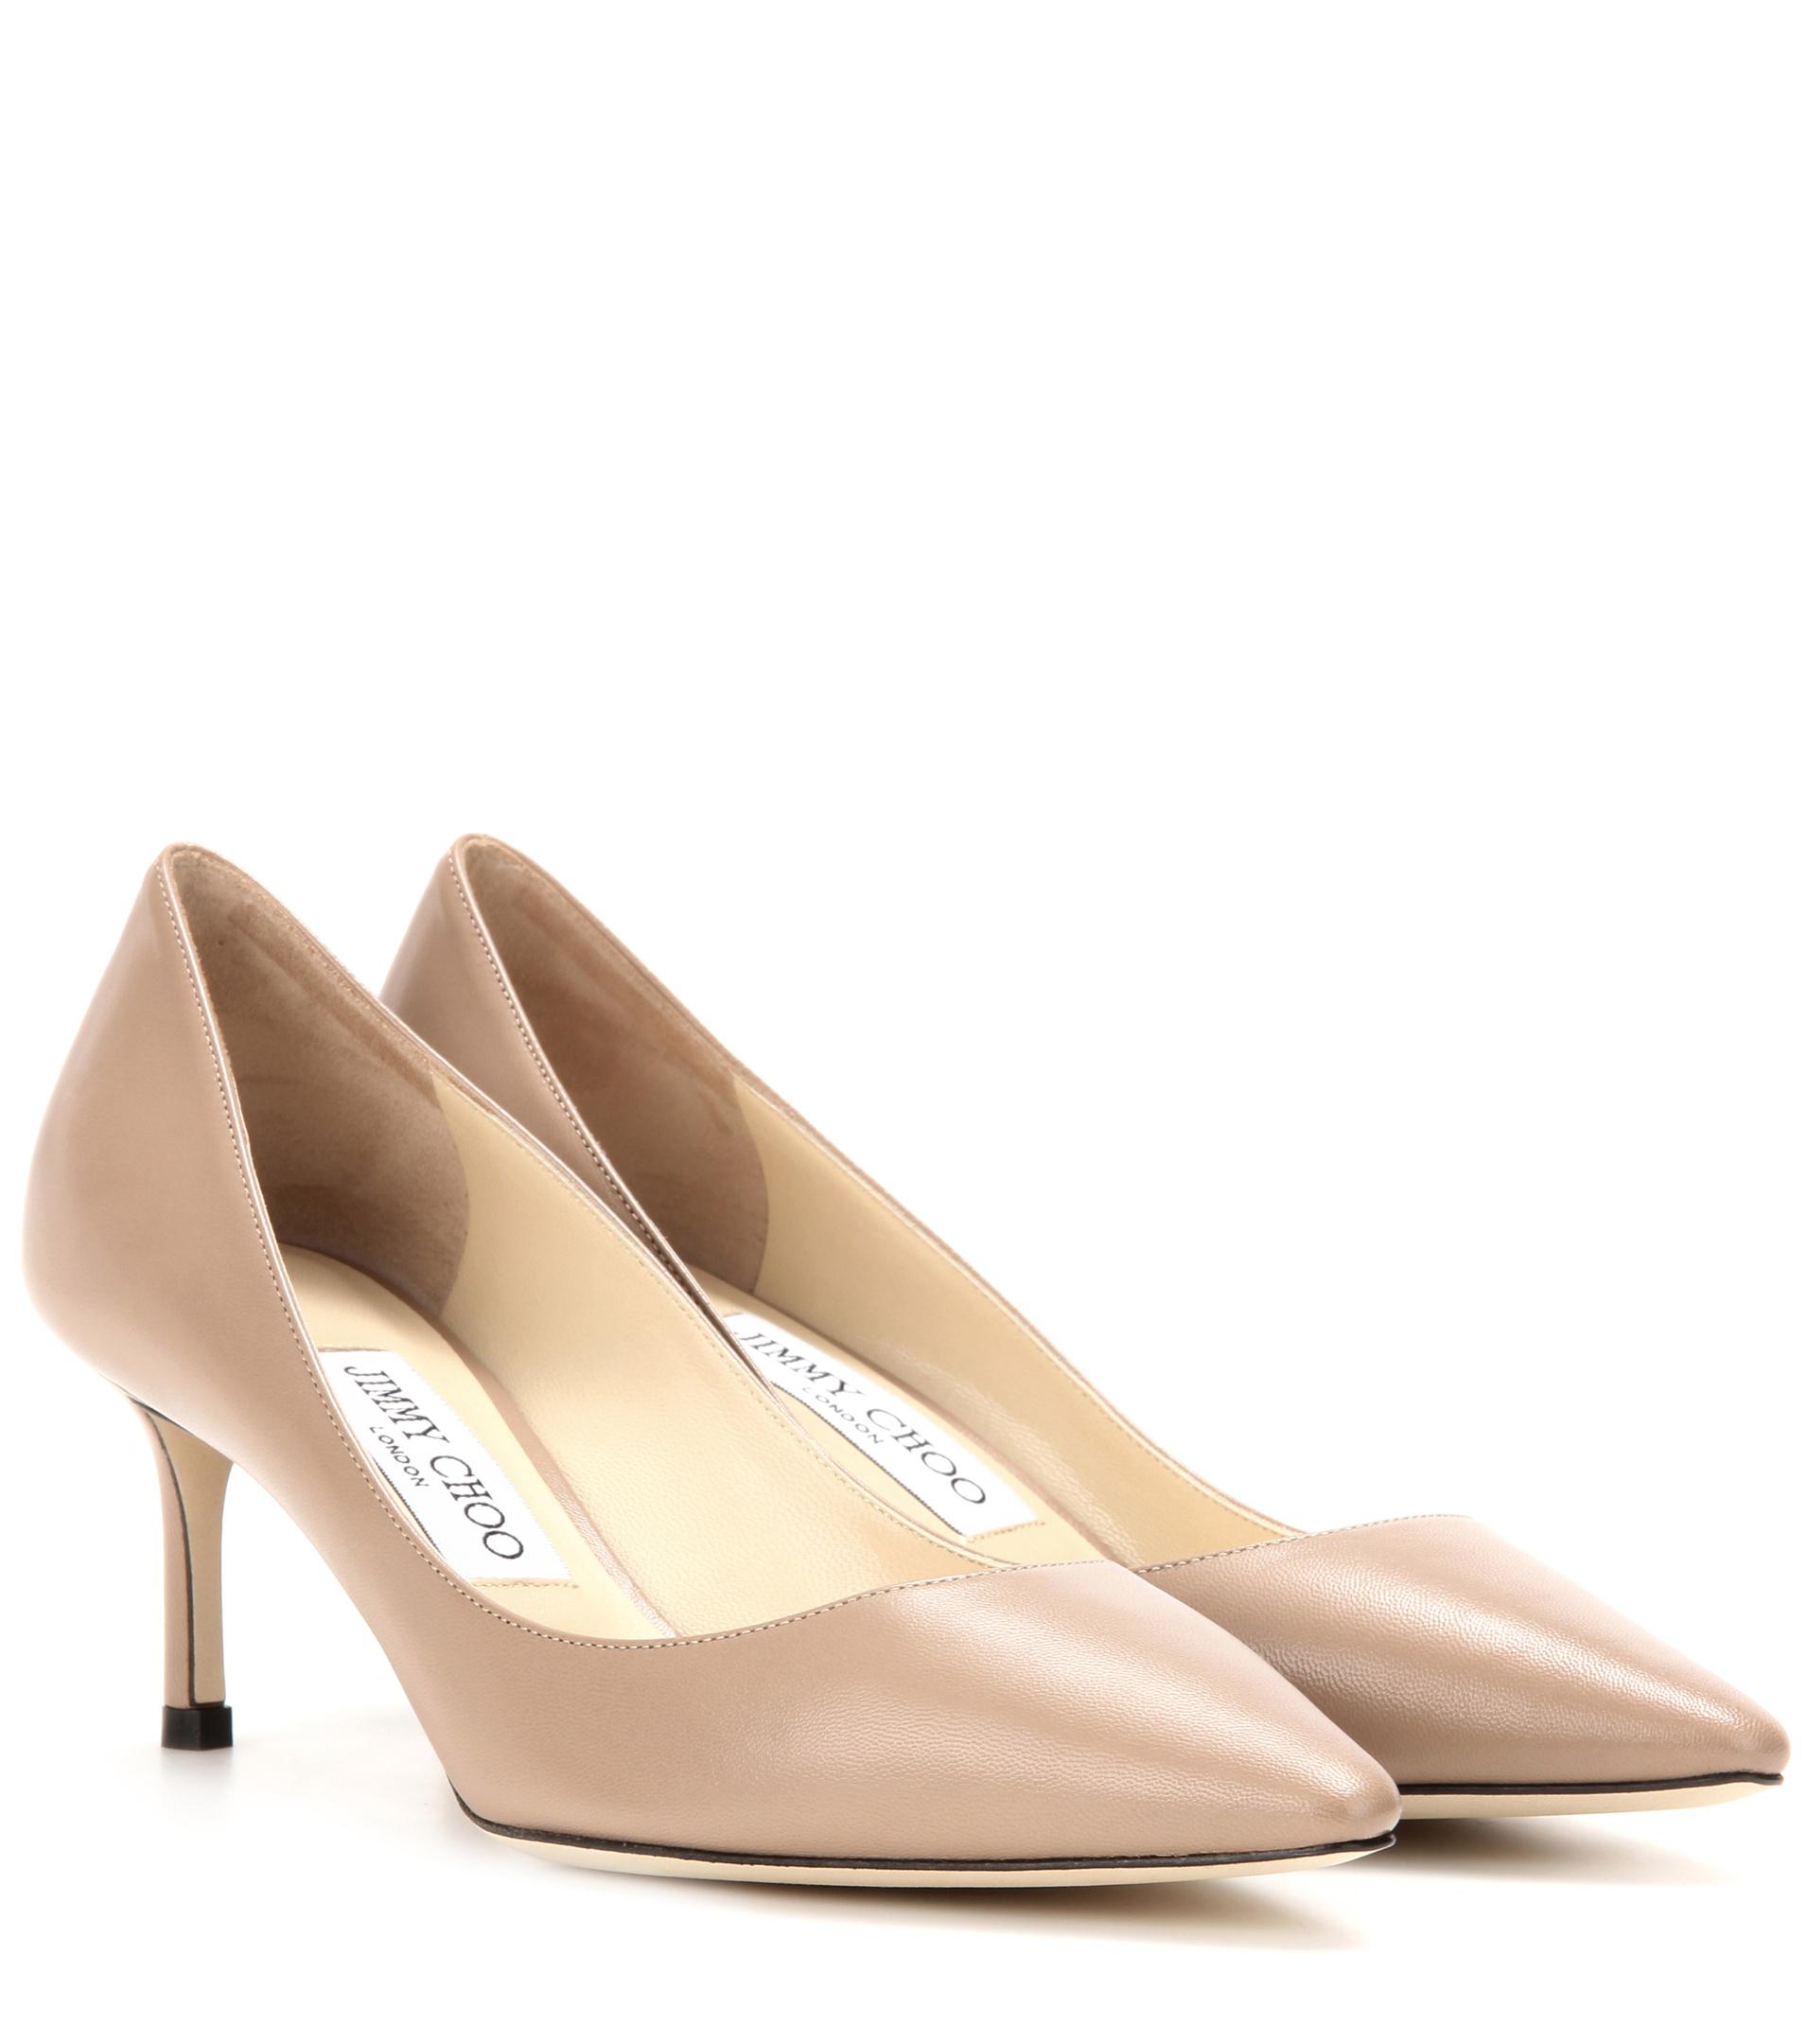 Jimmy Choo Romy 60 Patent Leather Pumps in Beige (Natural) - Save 8% - Lyst